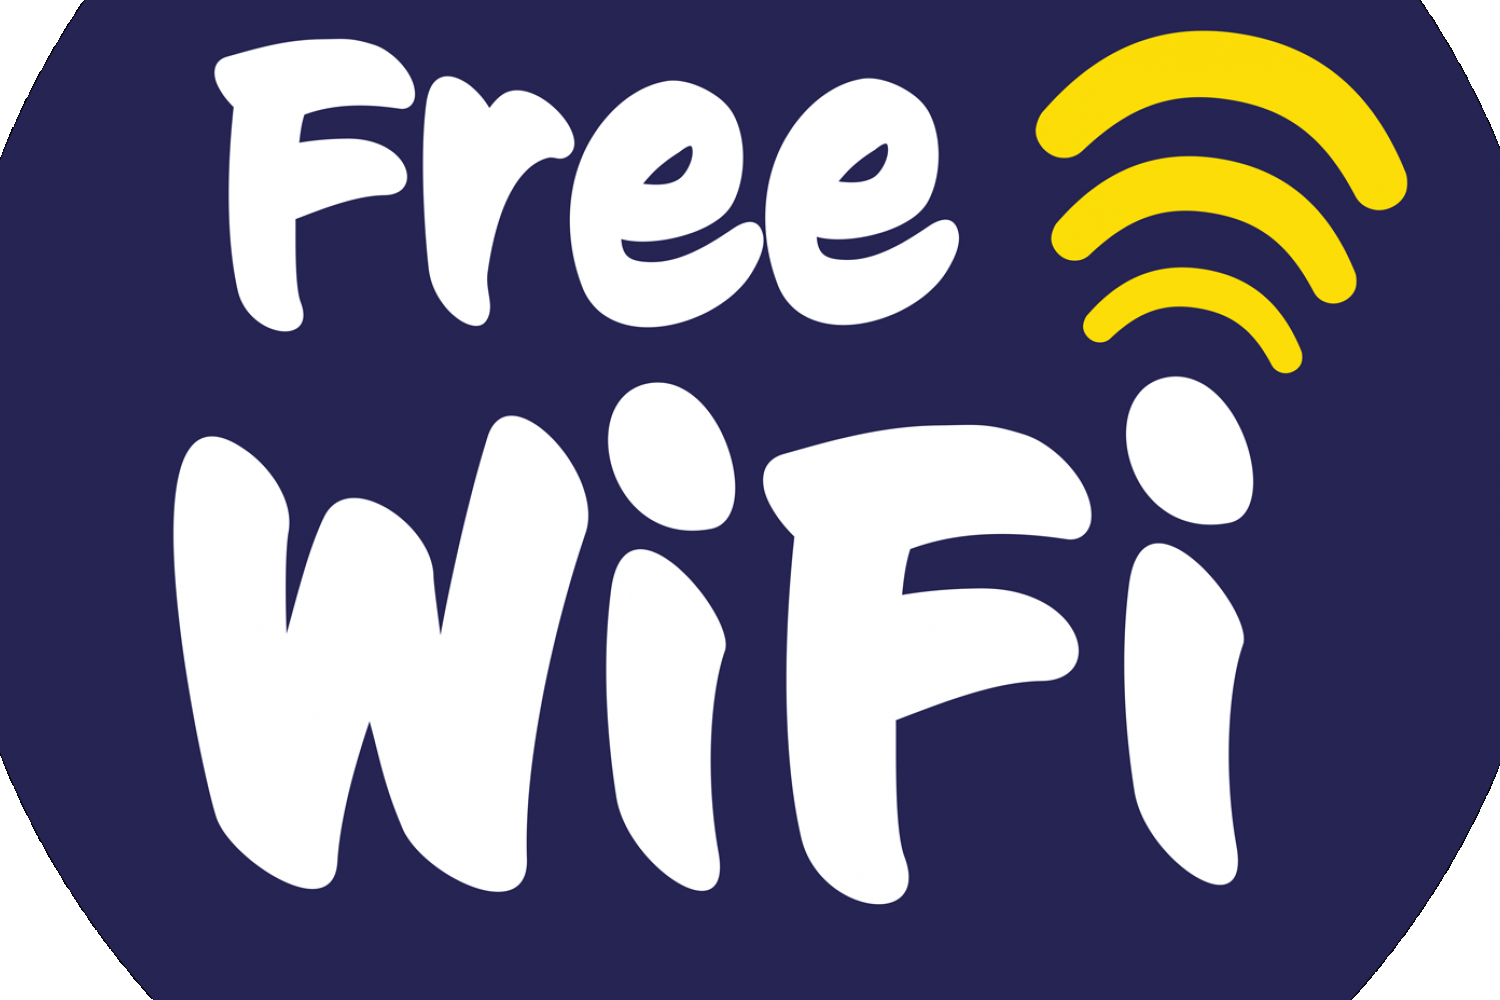 Free Wifi offered in all busses